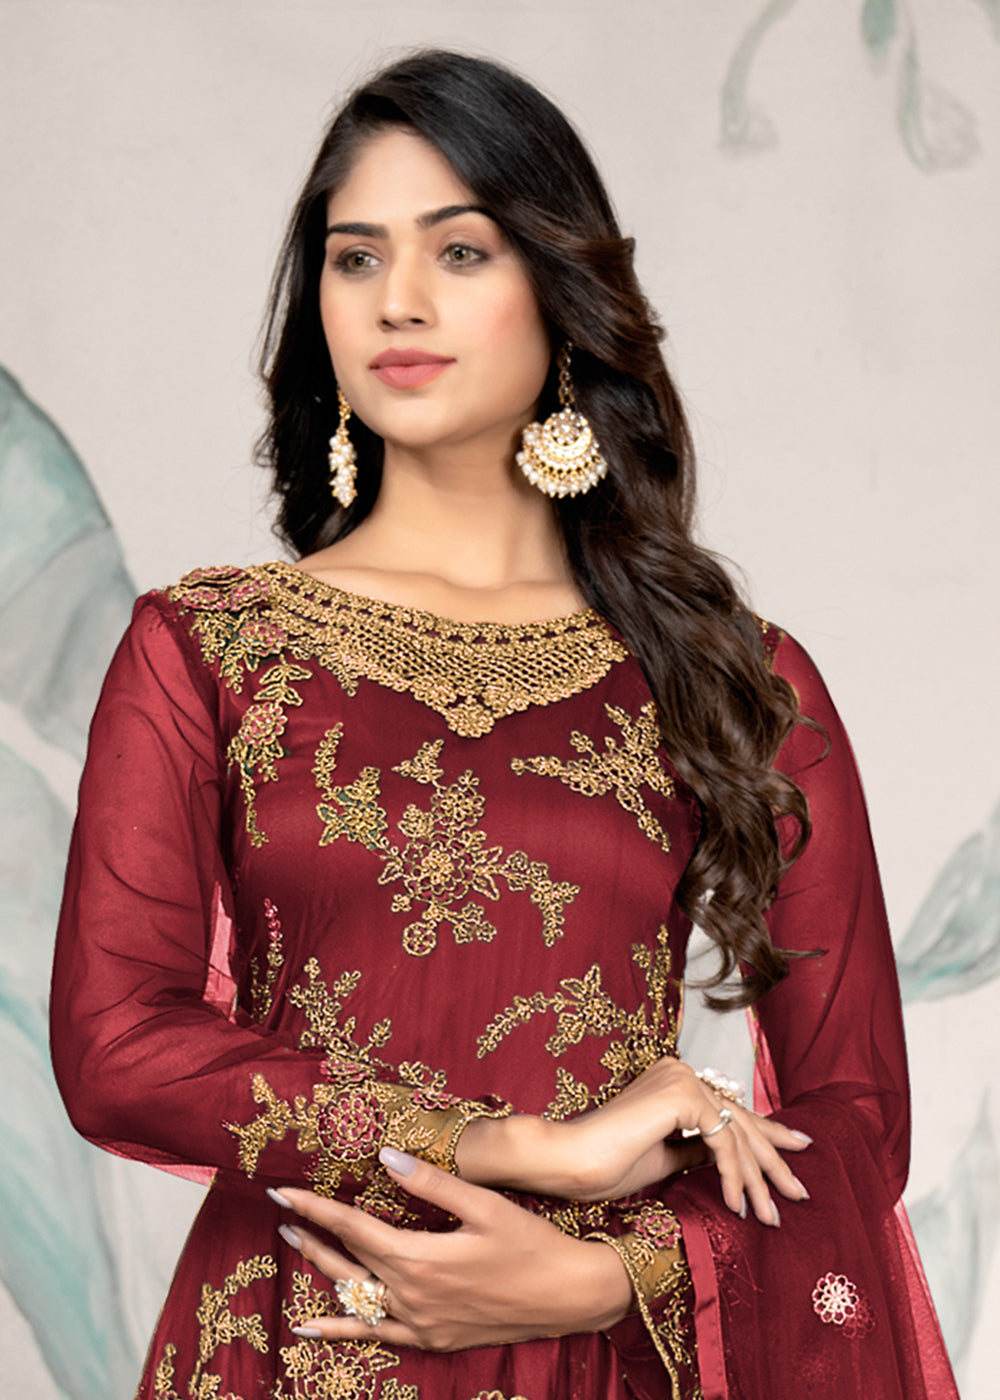 Buy Now Party Wear Maroon Thread & Sequins Work Anarkali Suit Online in USA, UK, Australia, New Zealand, Canada, Italy & Worldwide at Empress Clothing.